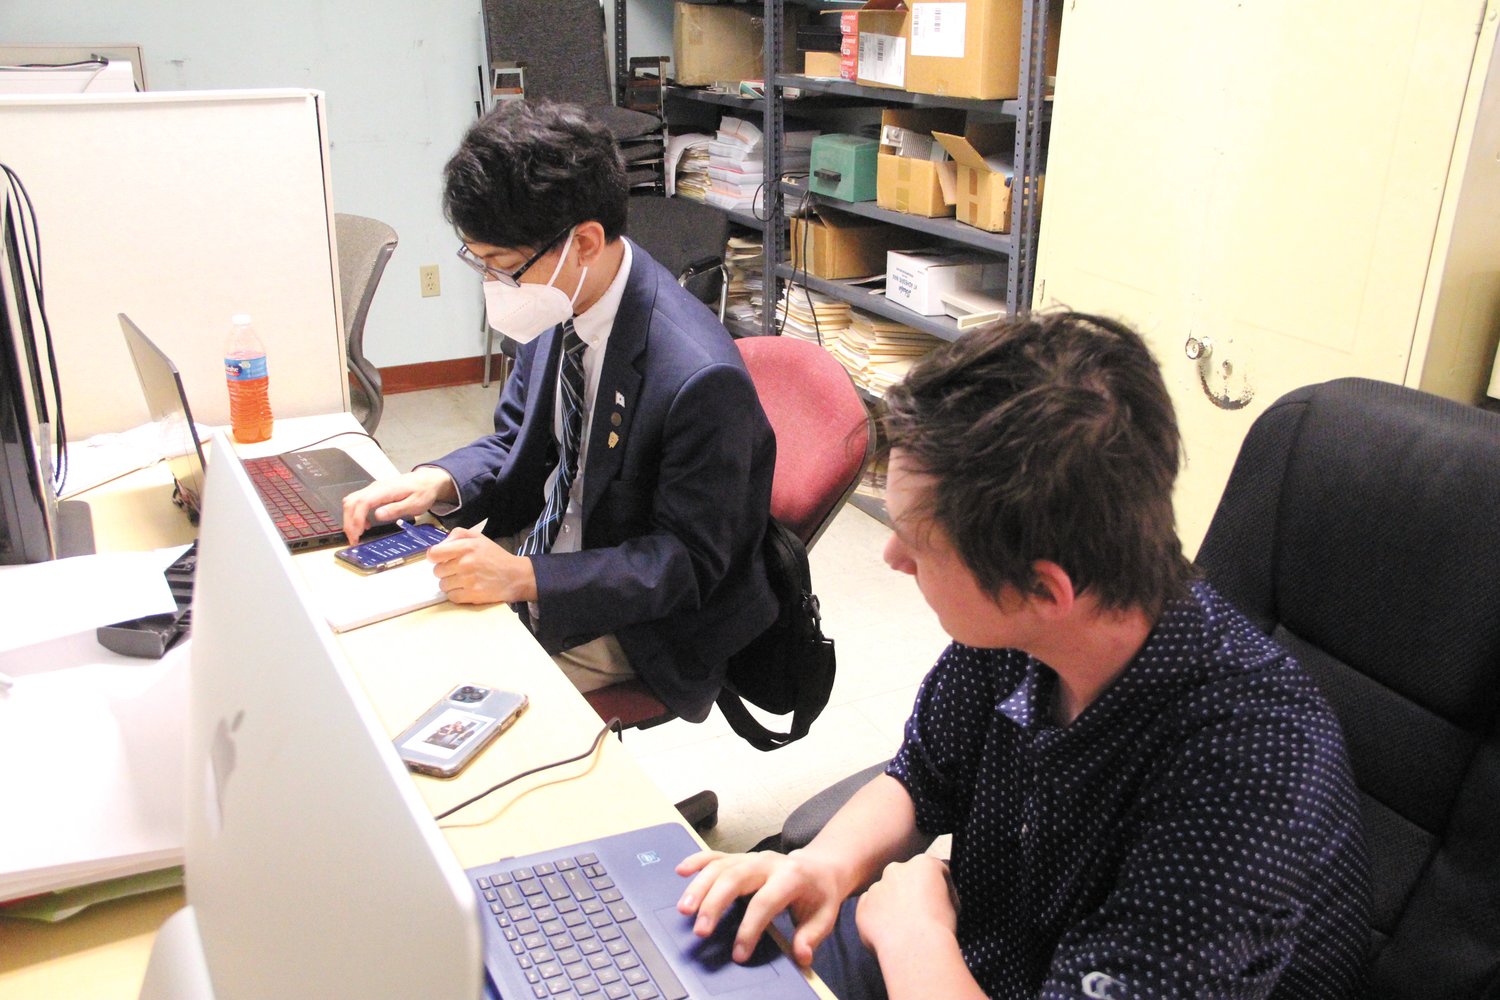 AT WORK: Hendricken seniors Aiden Cahill and Daniel Franchetti collaborate on a story about the senior experience. (Warwick Beacon photo)